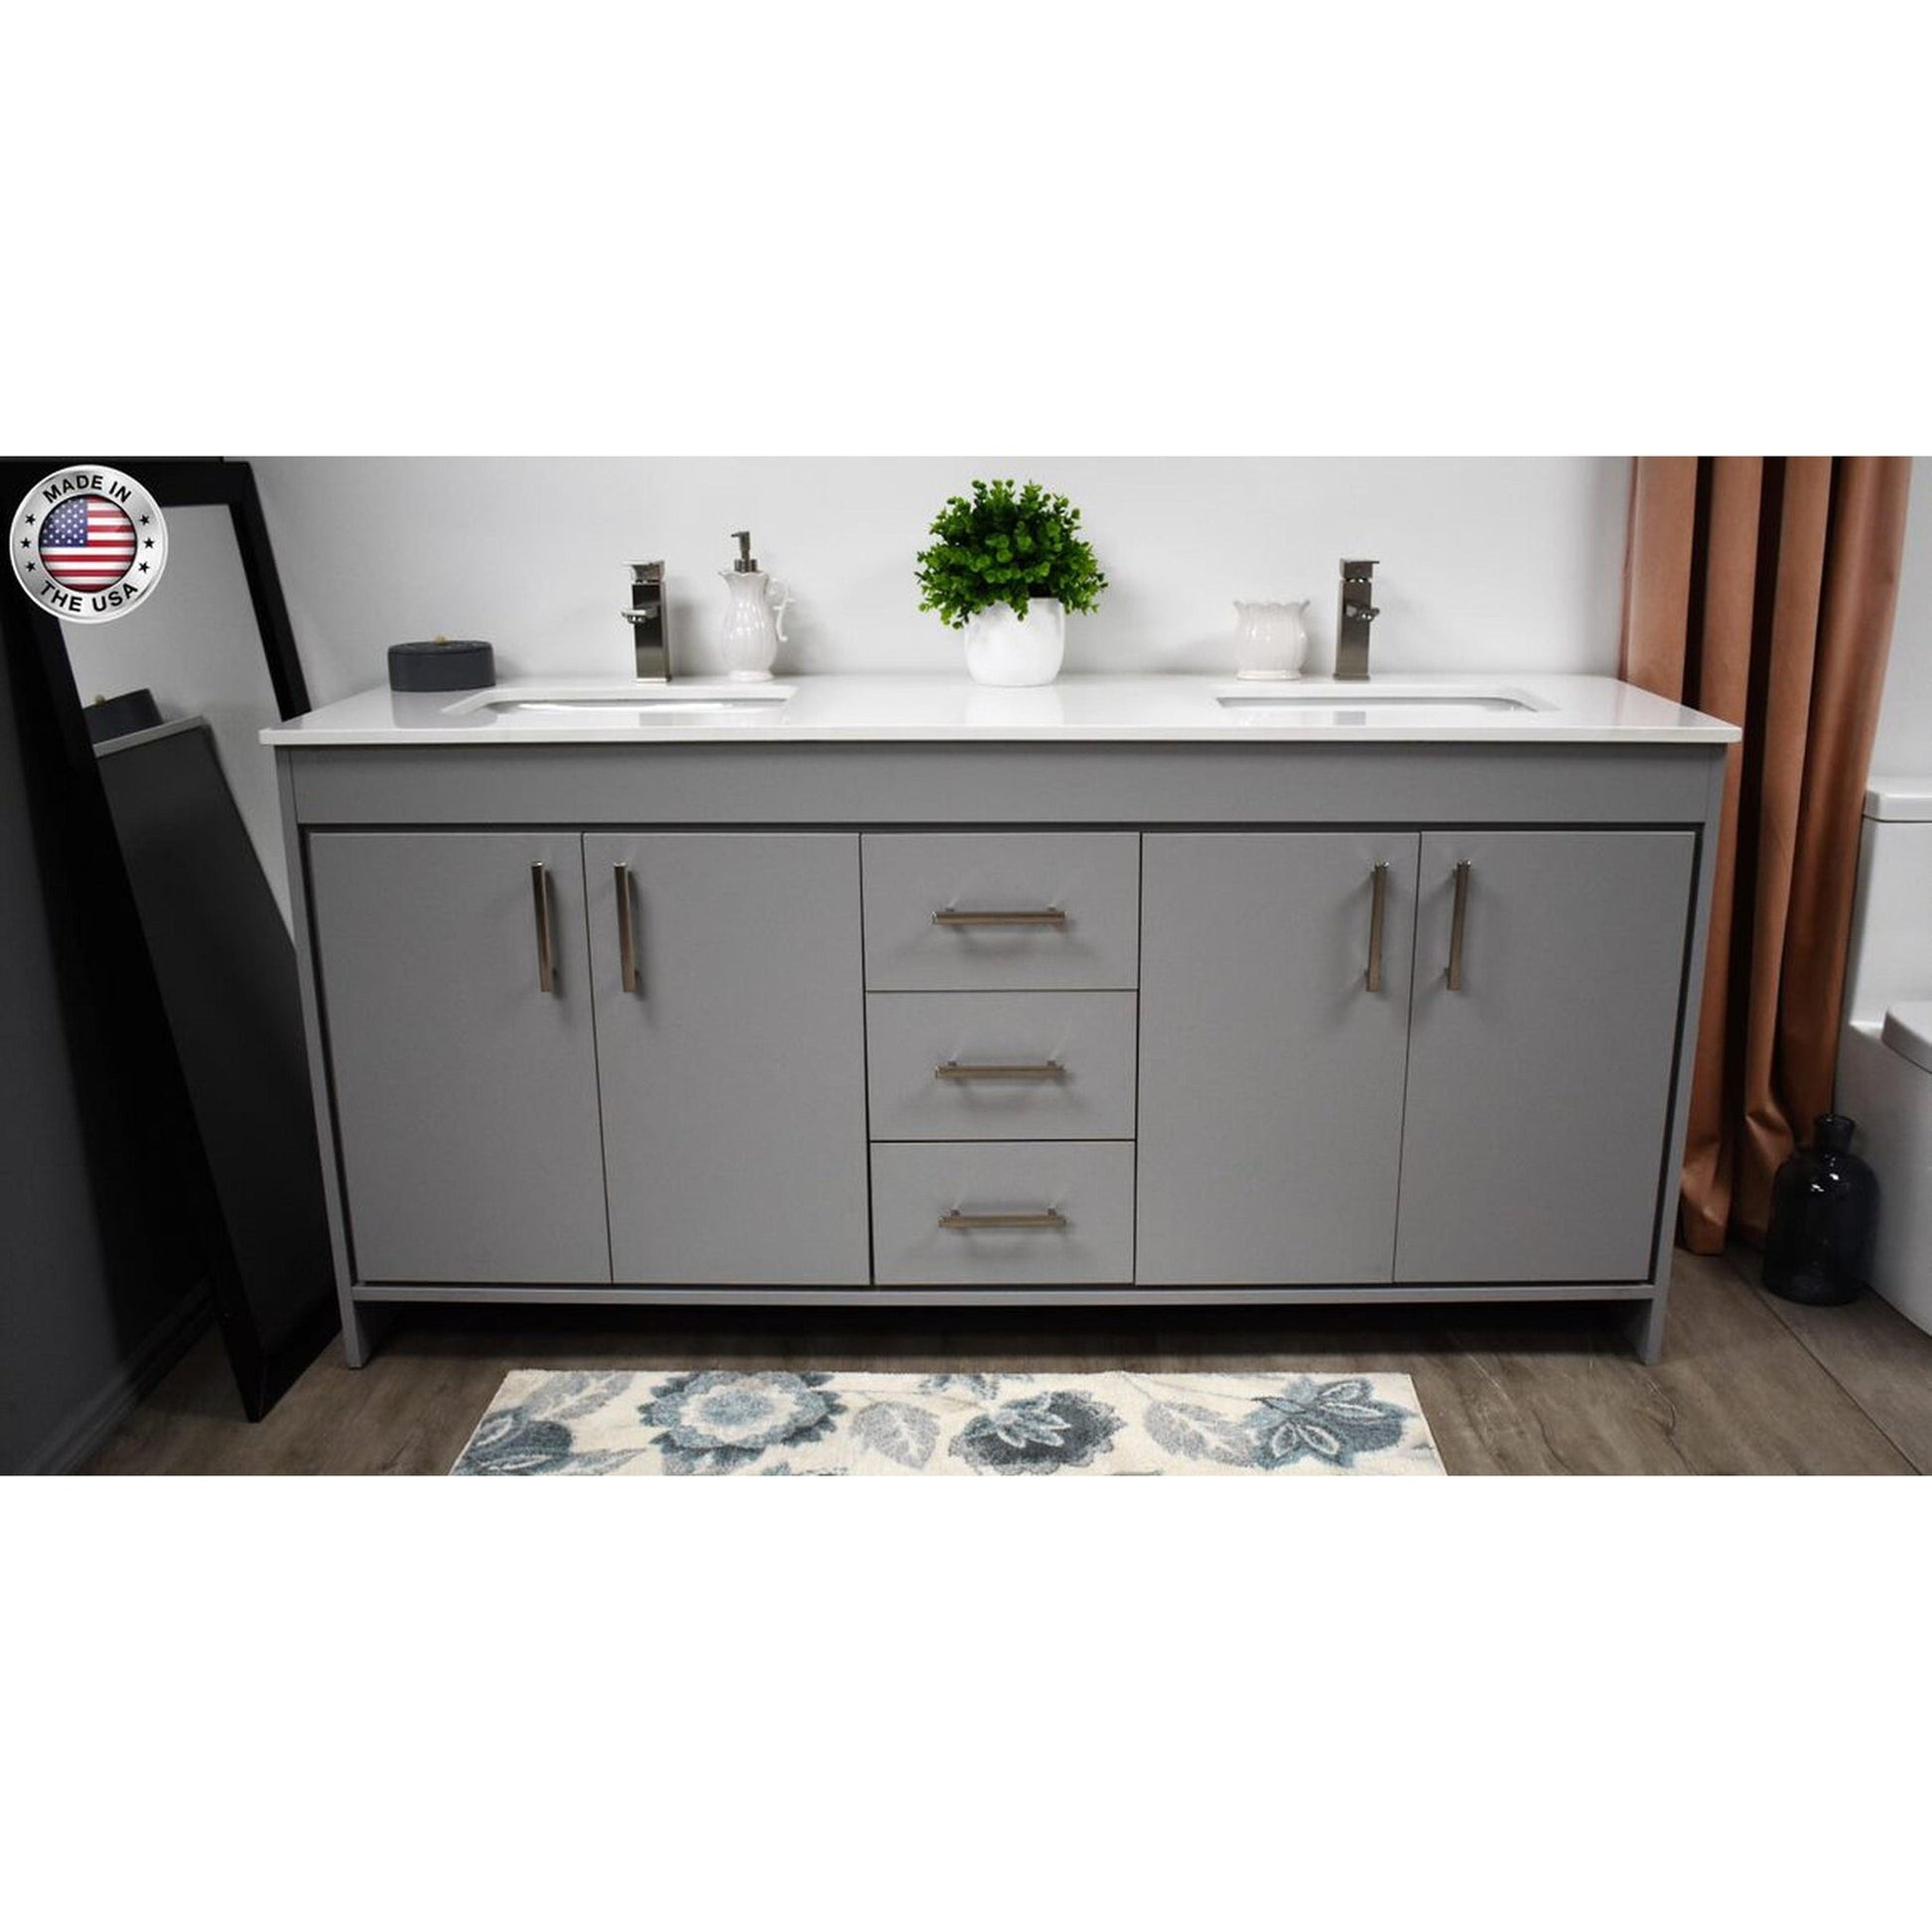 Volpa USA Capri 60" x 22" Gray Freestanding Modern Bathroom Vanity With Undermount Double Sink And White Microstone Top With Brushed Nickel Edge Handles